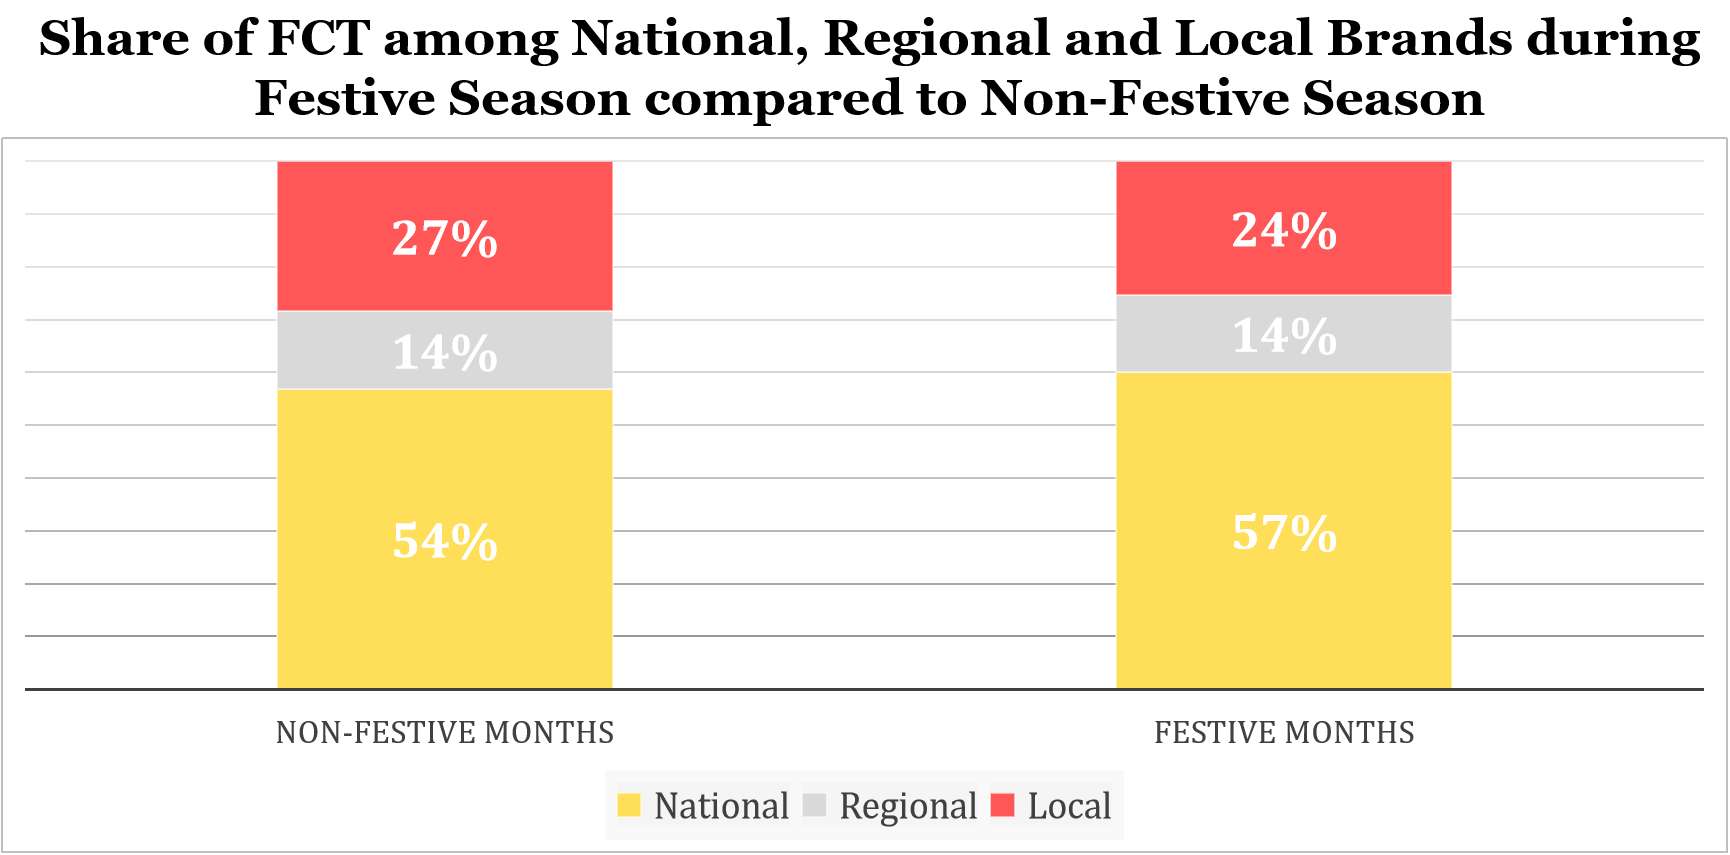 Radio advertising by national, regional and local brands